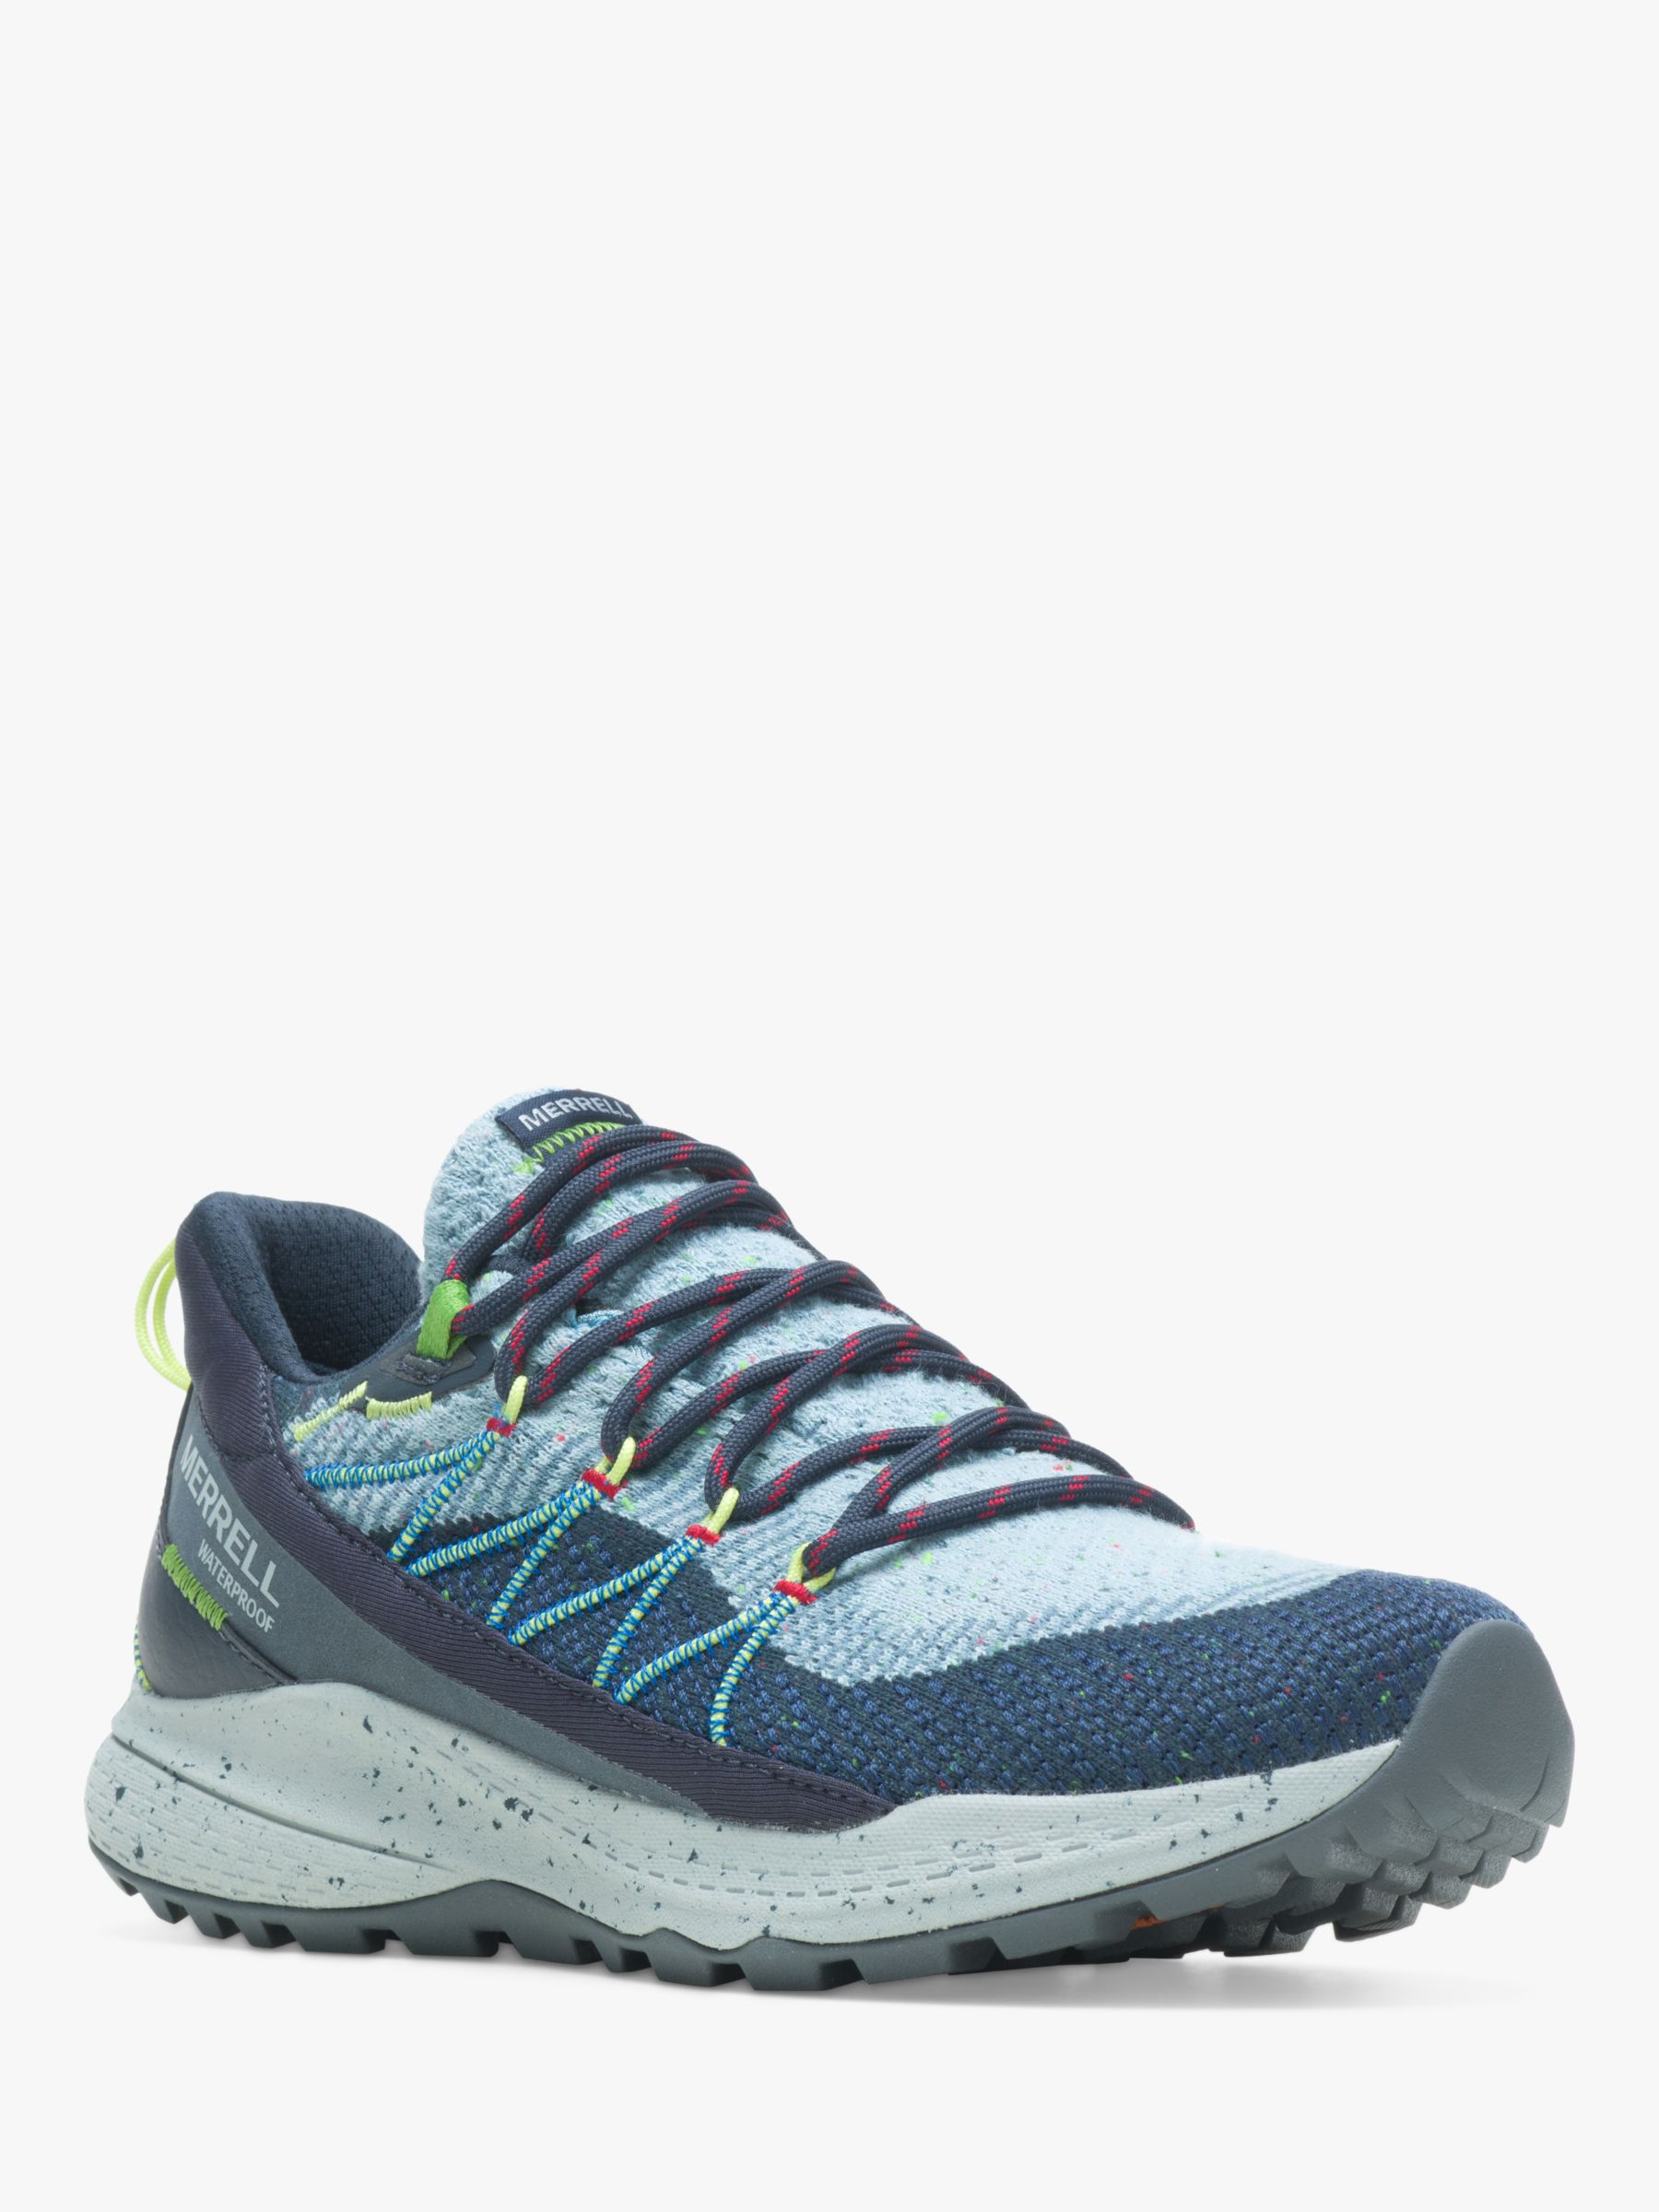 Merrell Bravada, review and details, From £29.99